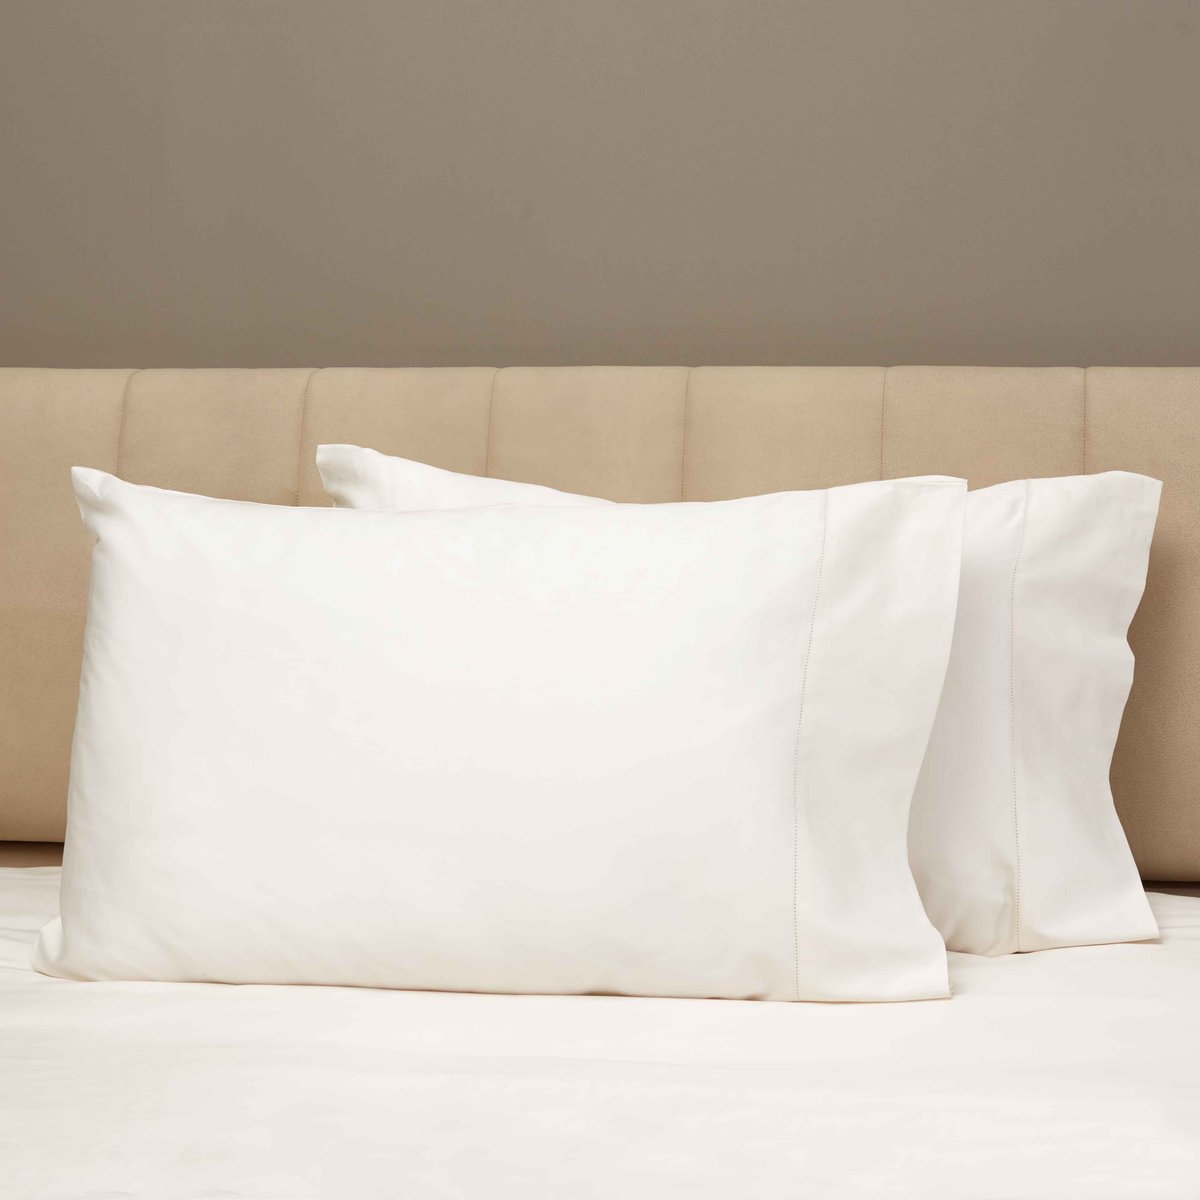 Front View of Signoria Nuvola Bedding Pillowcases in Ivory Color